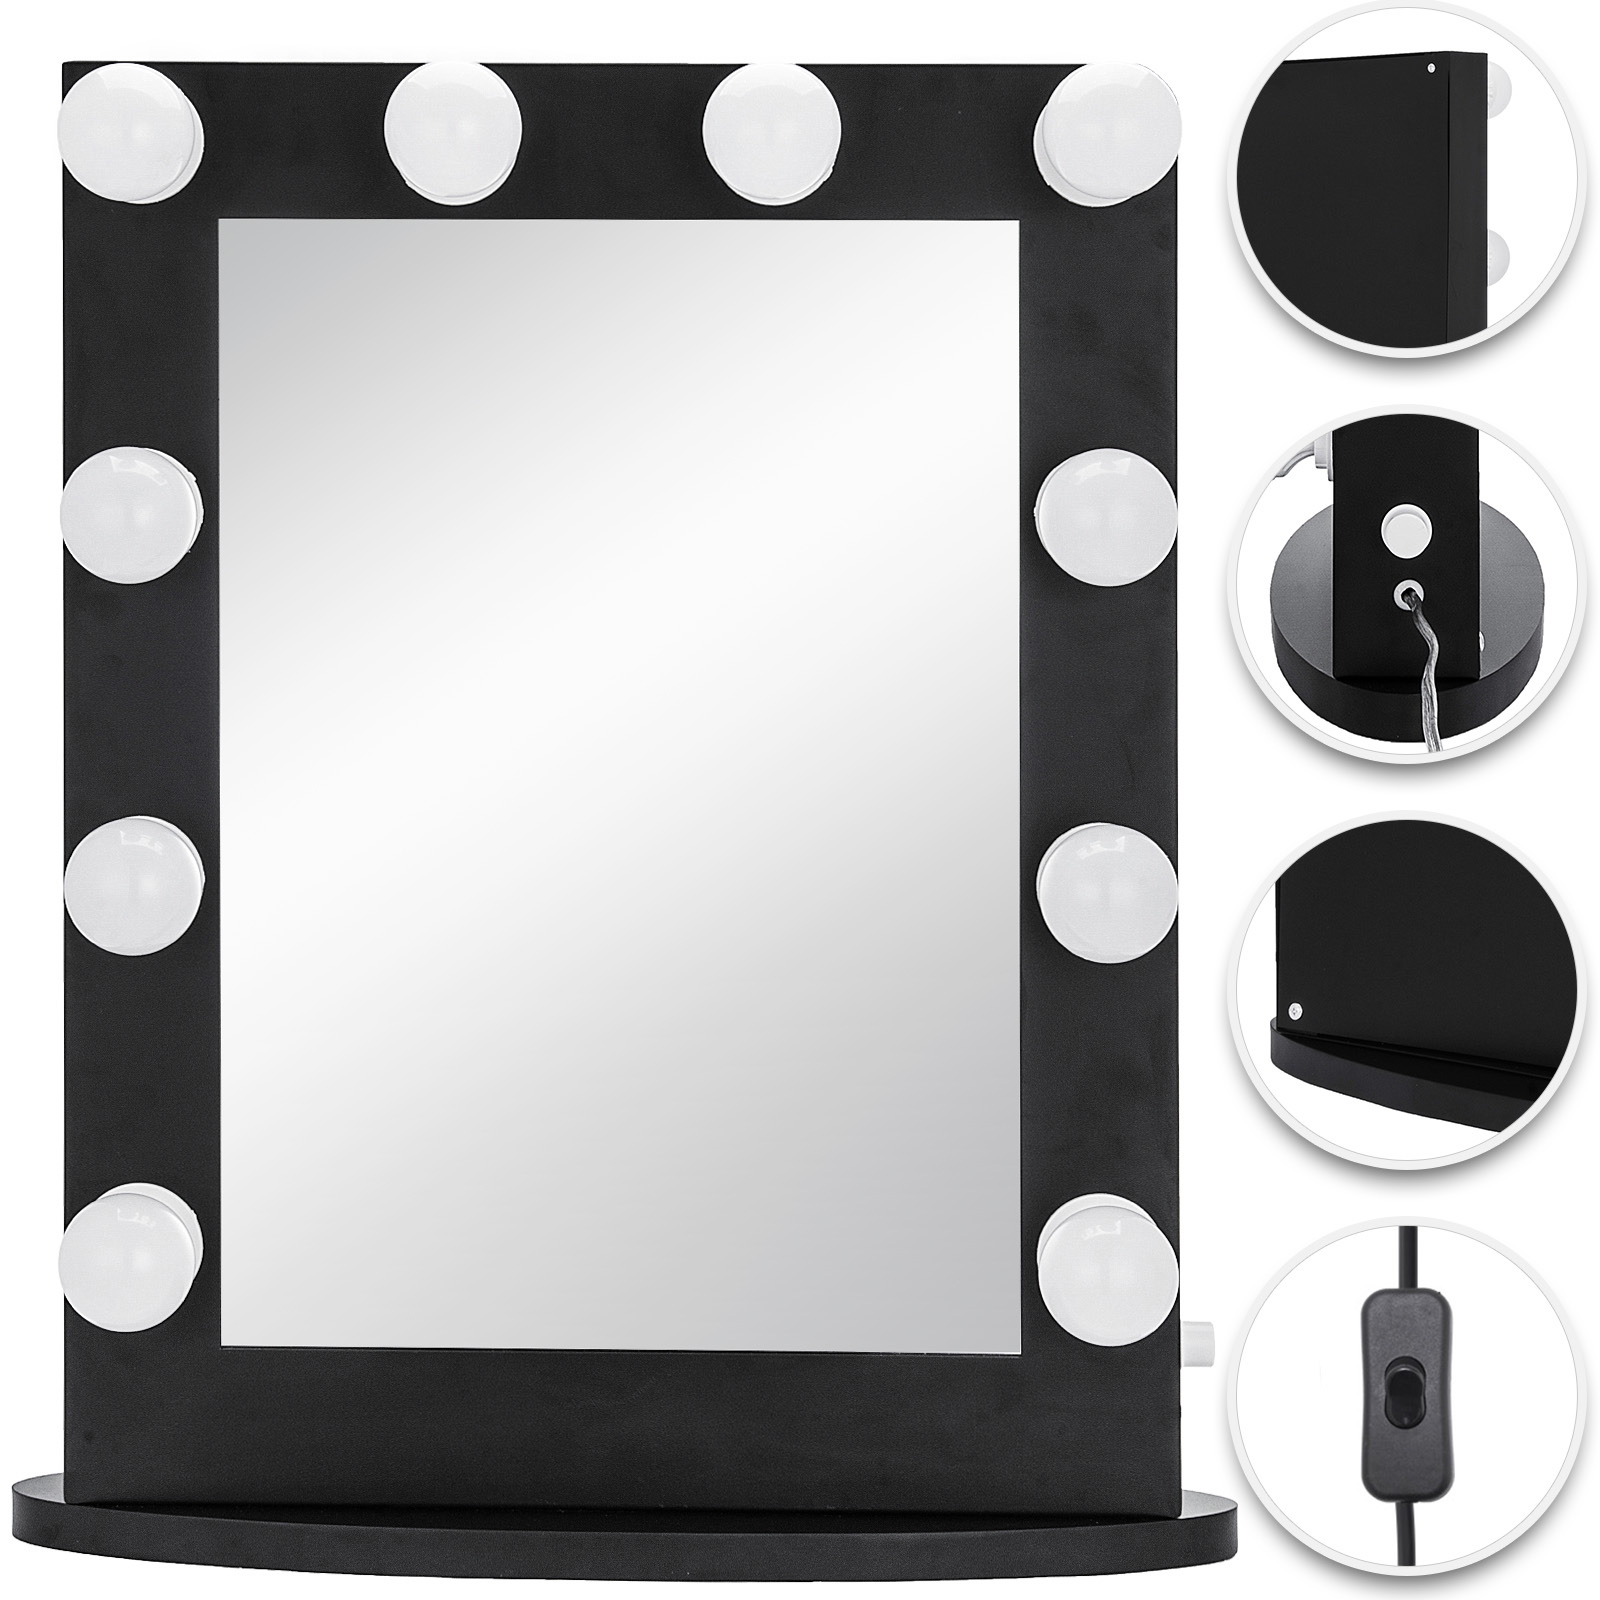 Large Hollywood Makeup Mirror Vanity Lighted 12 Led Bulbs Tabletop Or Wall от Vevor Many GEOs